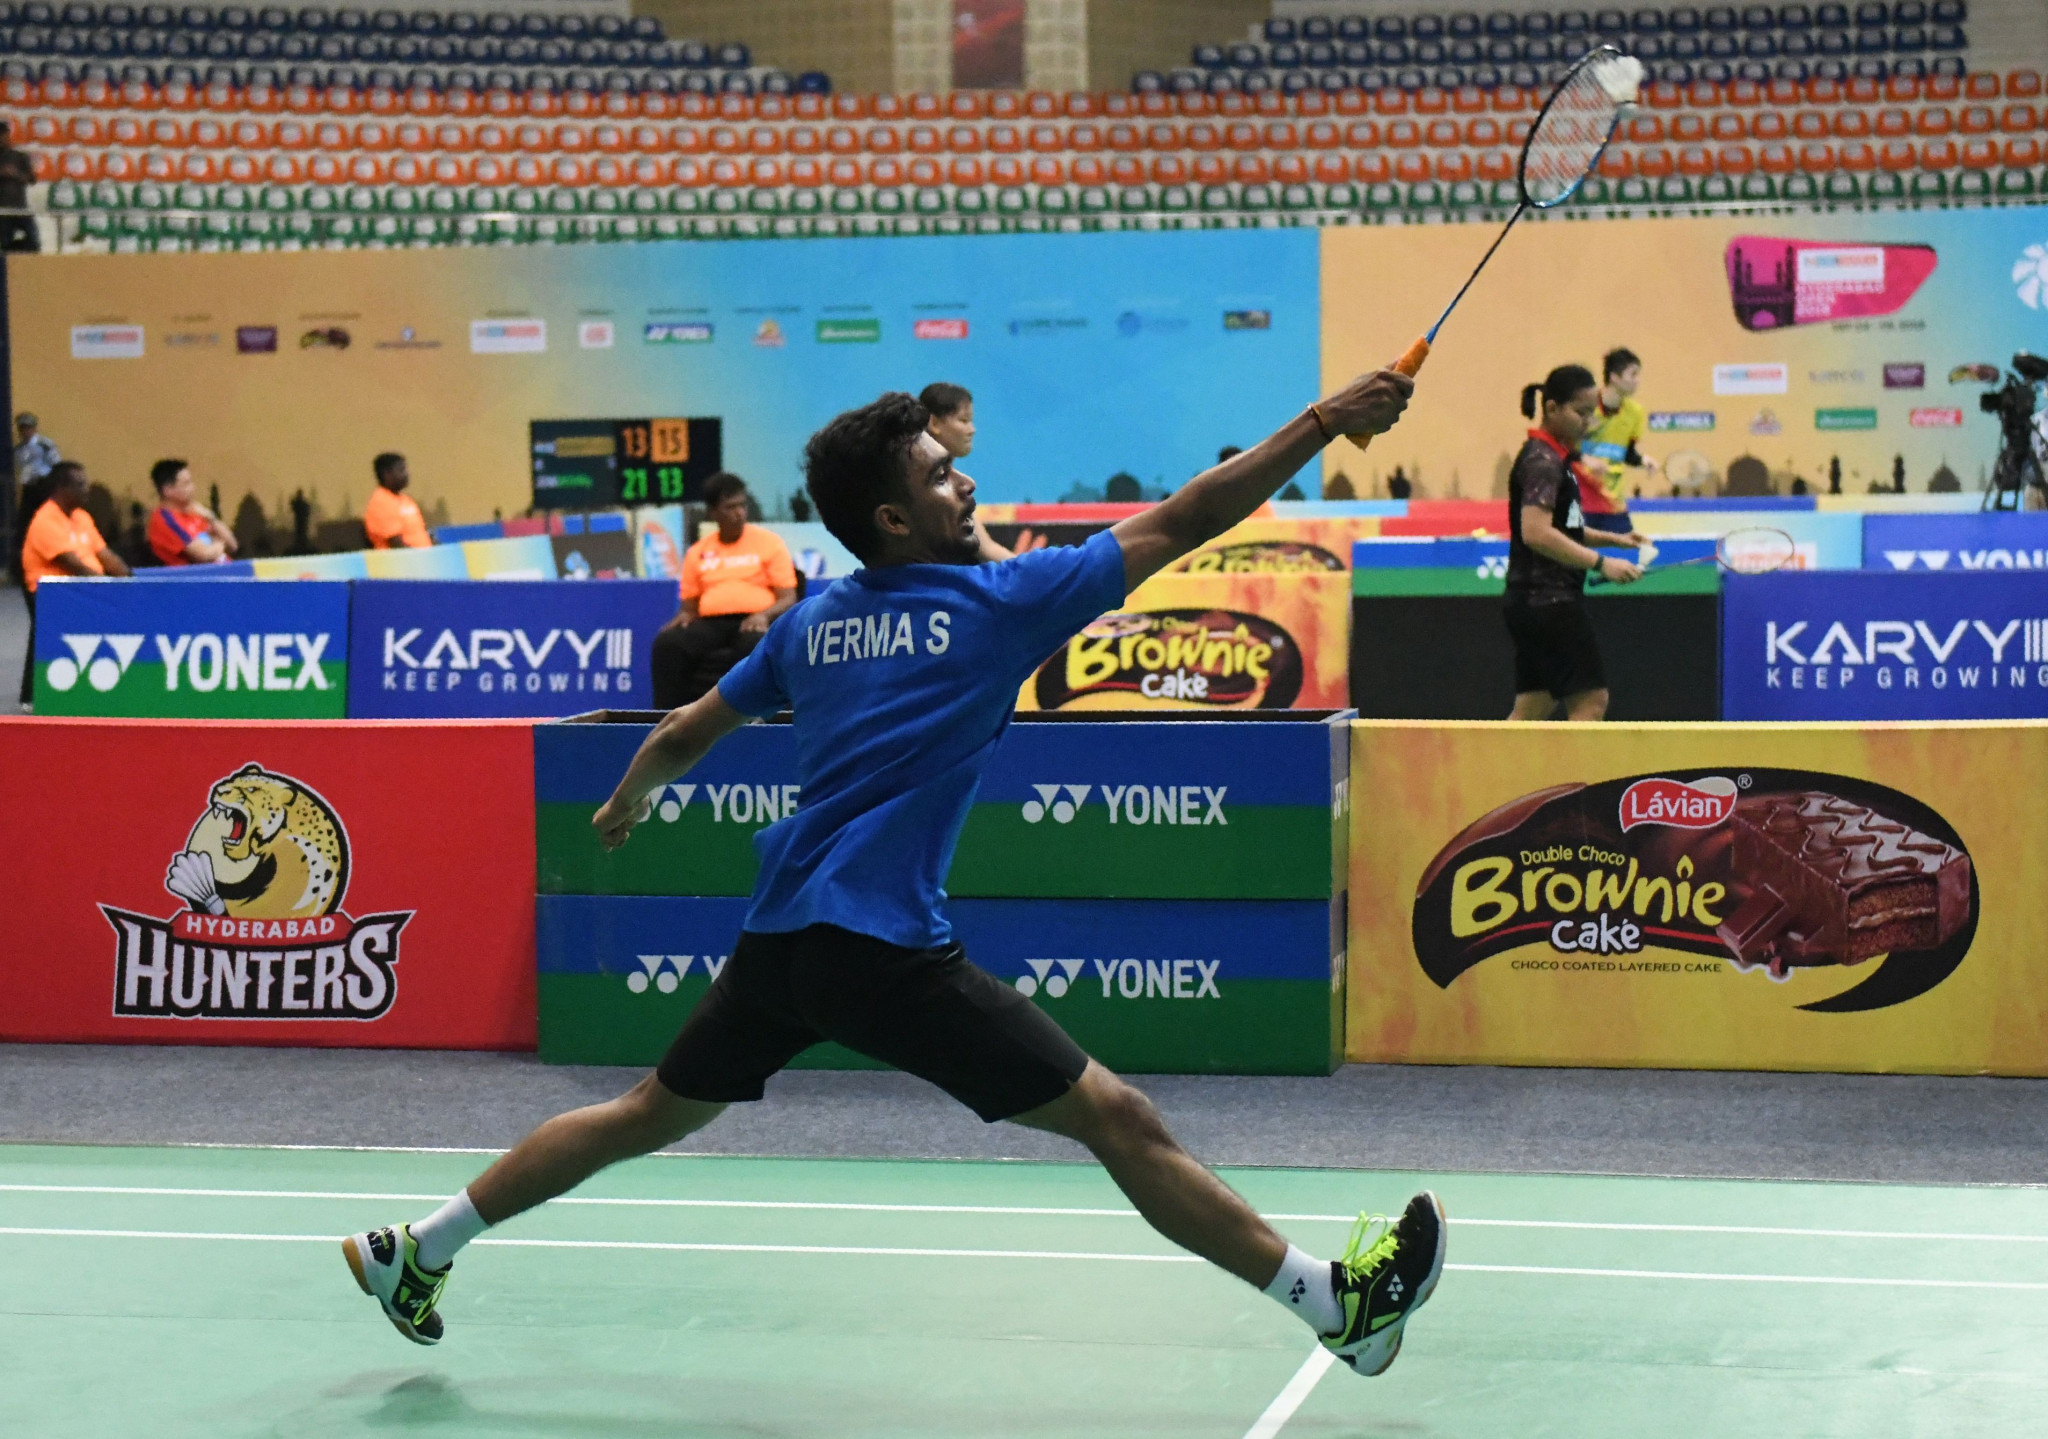 Verma earns tough win over fellow Indian to reach BWF Hyderabad Open last four